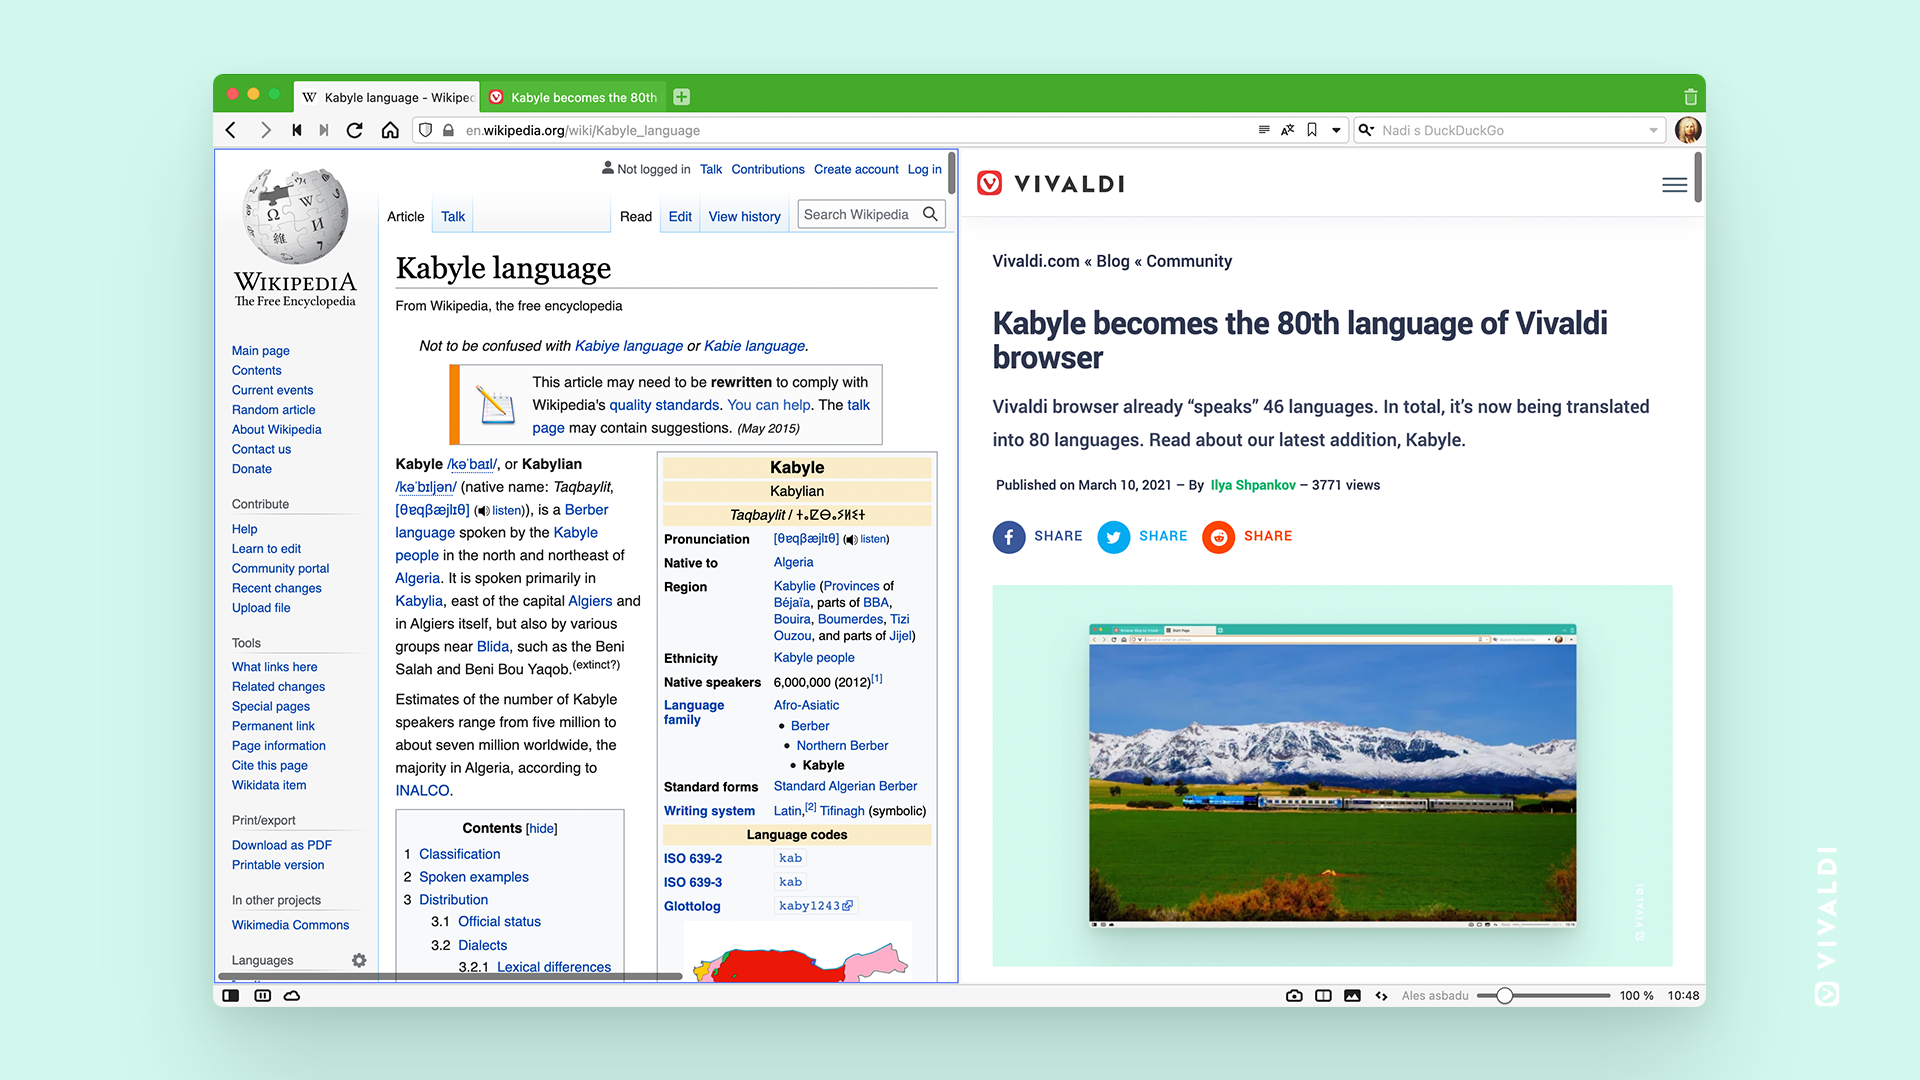 Kabyle_language_in_Vivaldi_browser_features